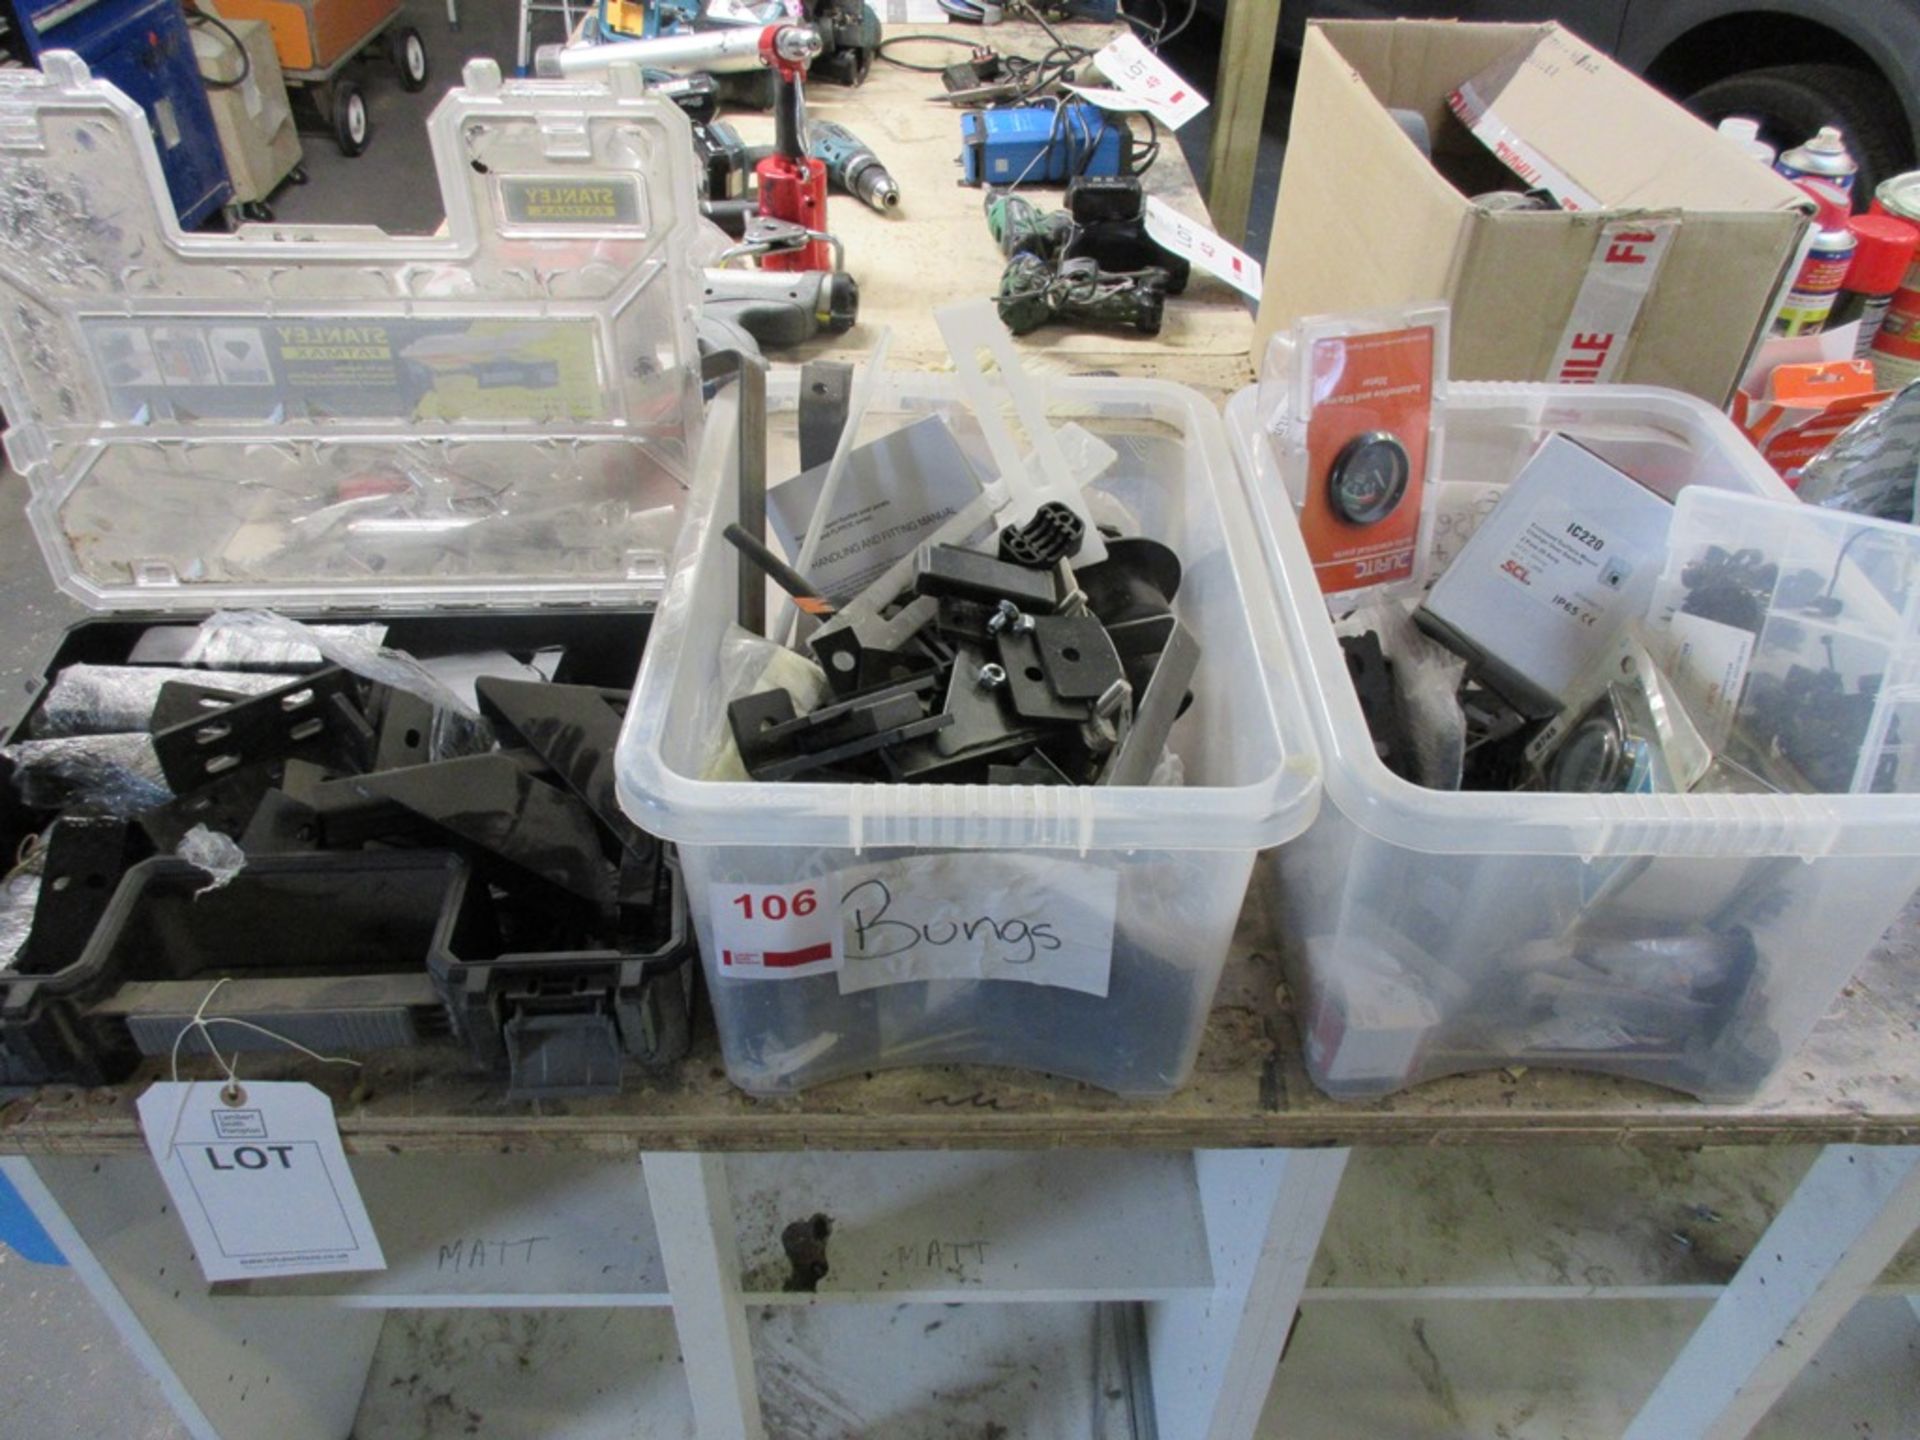 Miscellaneous lot including brackets, fittings, electrical gauge, charge over switch, etc.